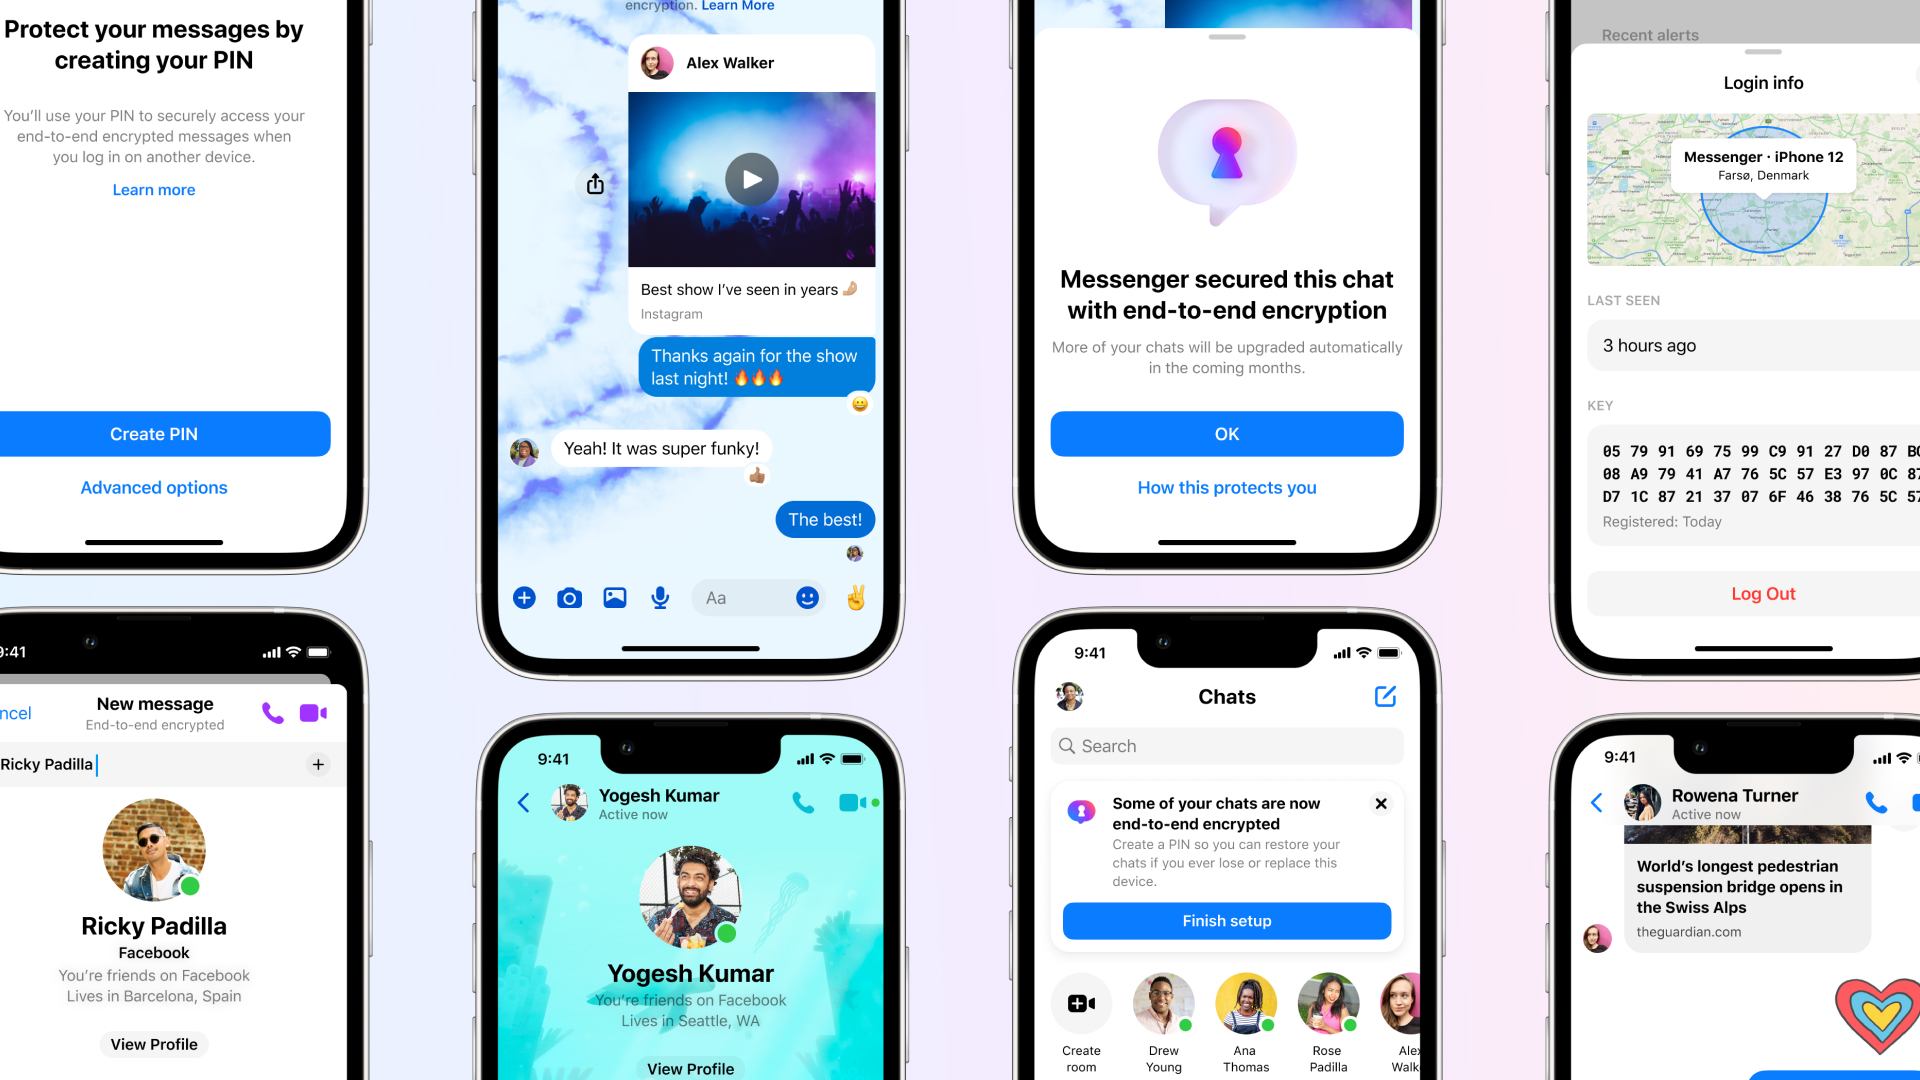 Product mocks of end-to-end encryption on Messenger